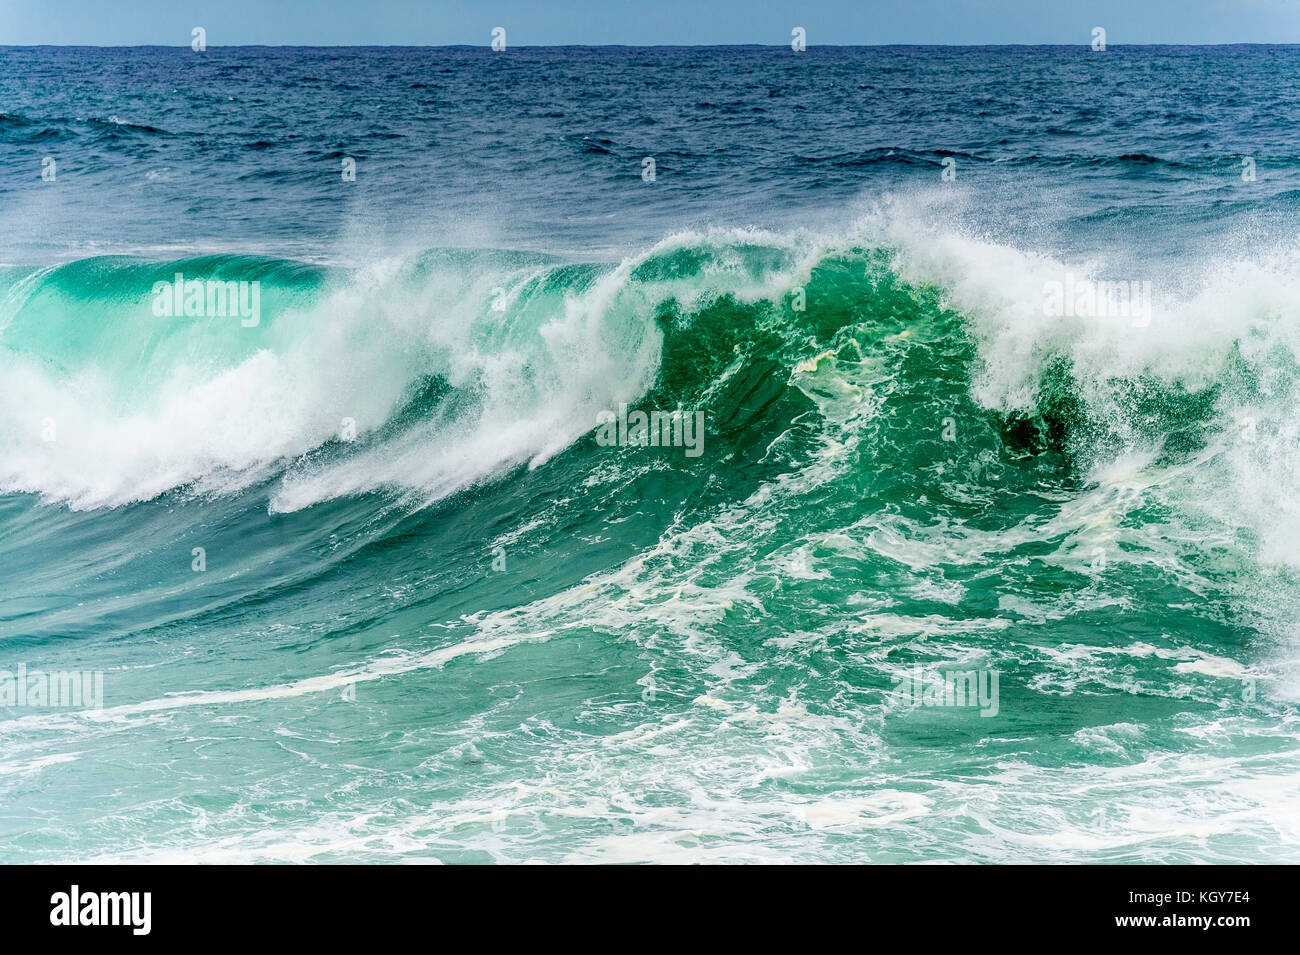 Dangerous surf conditions at Bronte Beach in Sydney, NSW, Australia Stock Photo